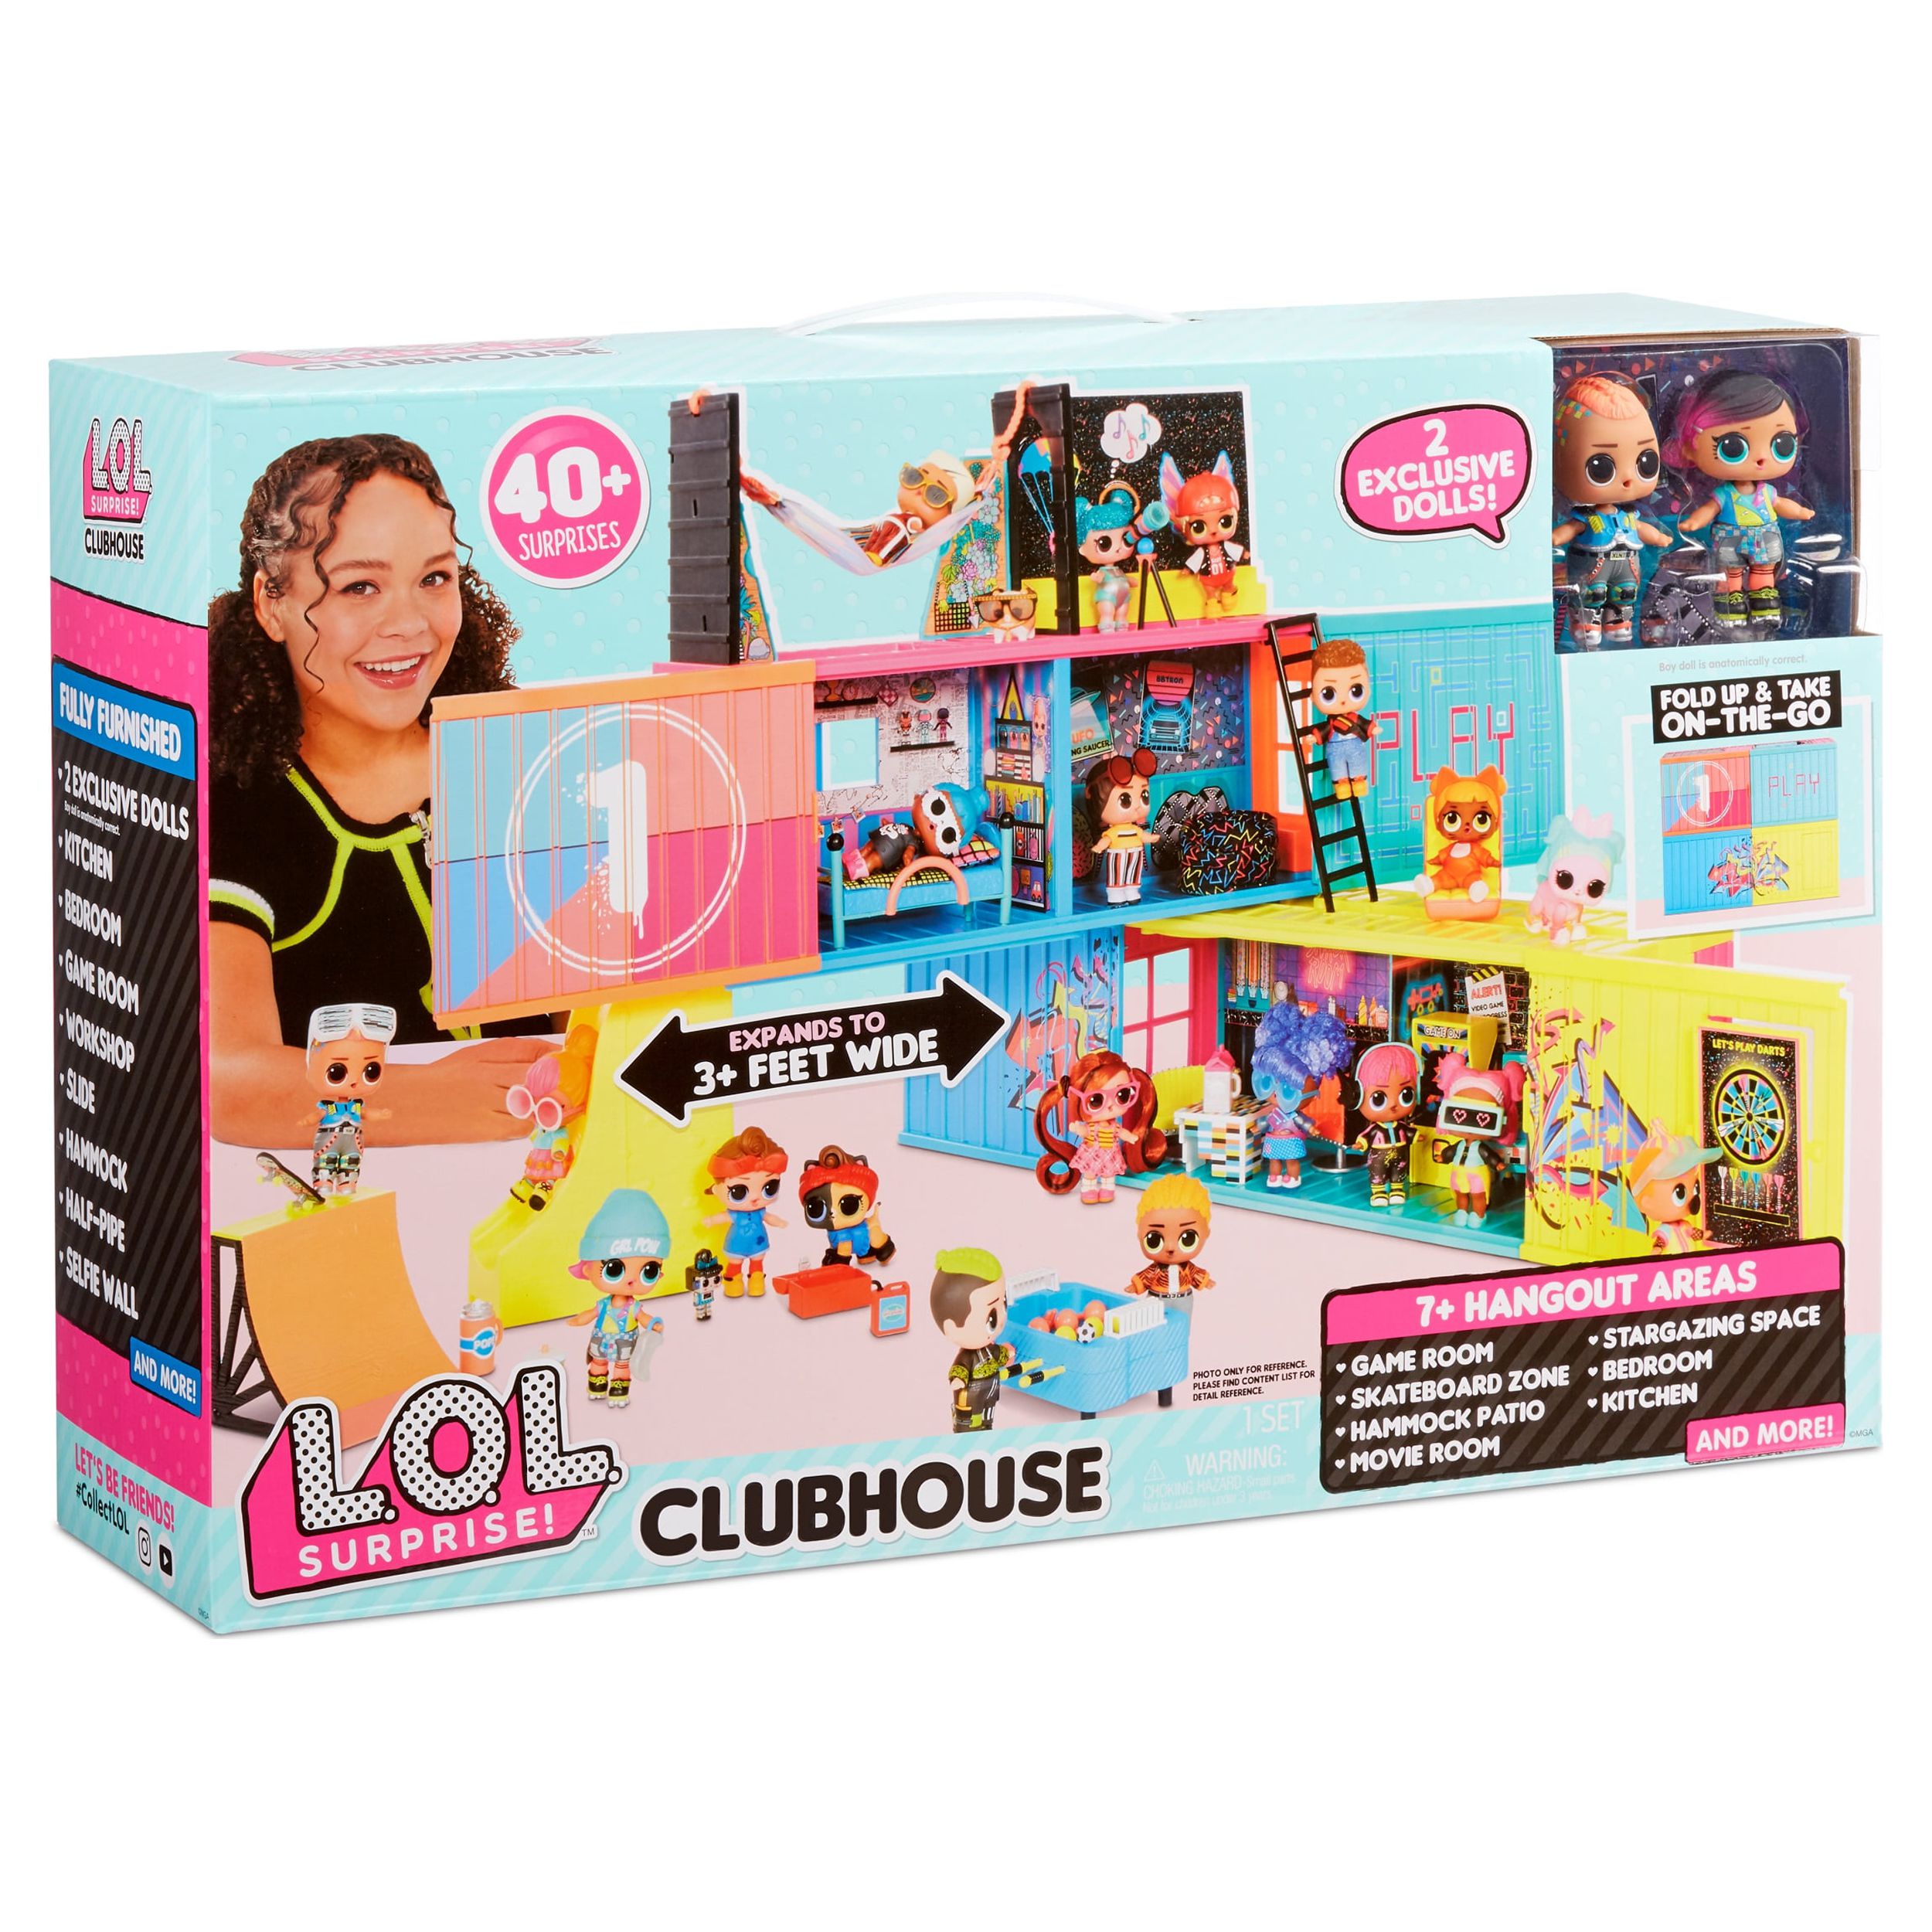 LOL Surprise Clubhouse Playset With 40+ Surprises and 2 Exclusives Dolls, Great Gift for Kids Ages 4 5 6+ - image 7 of 12